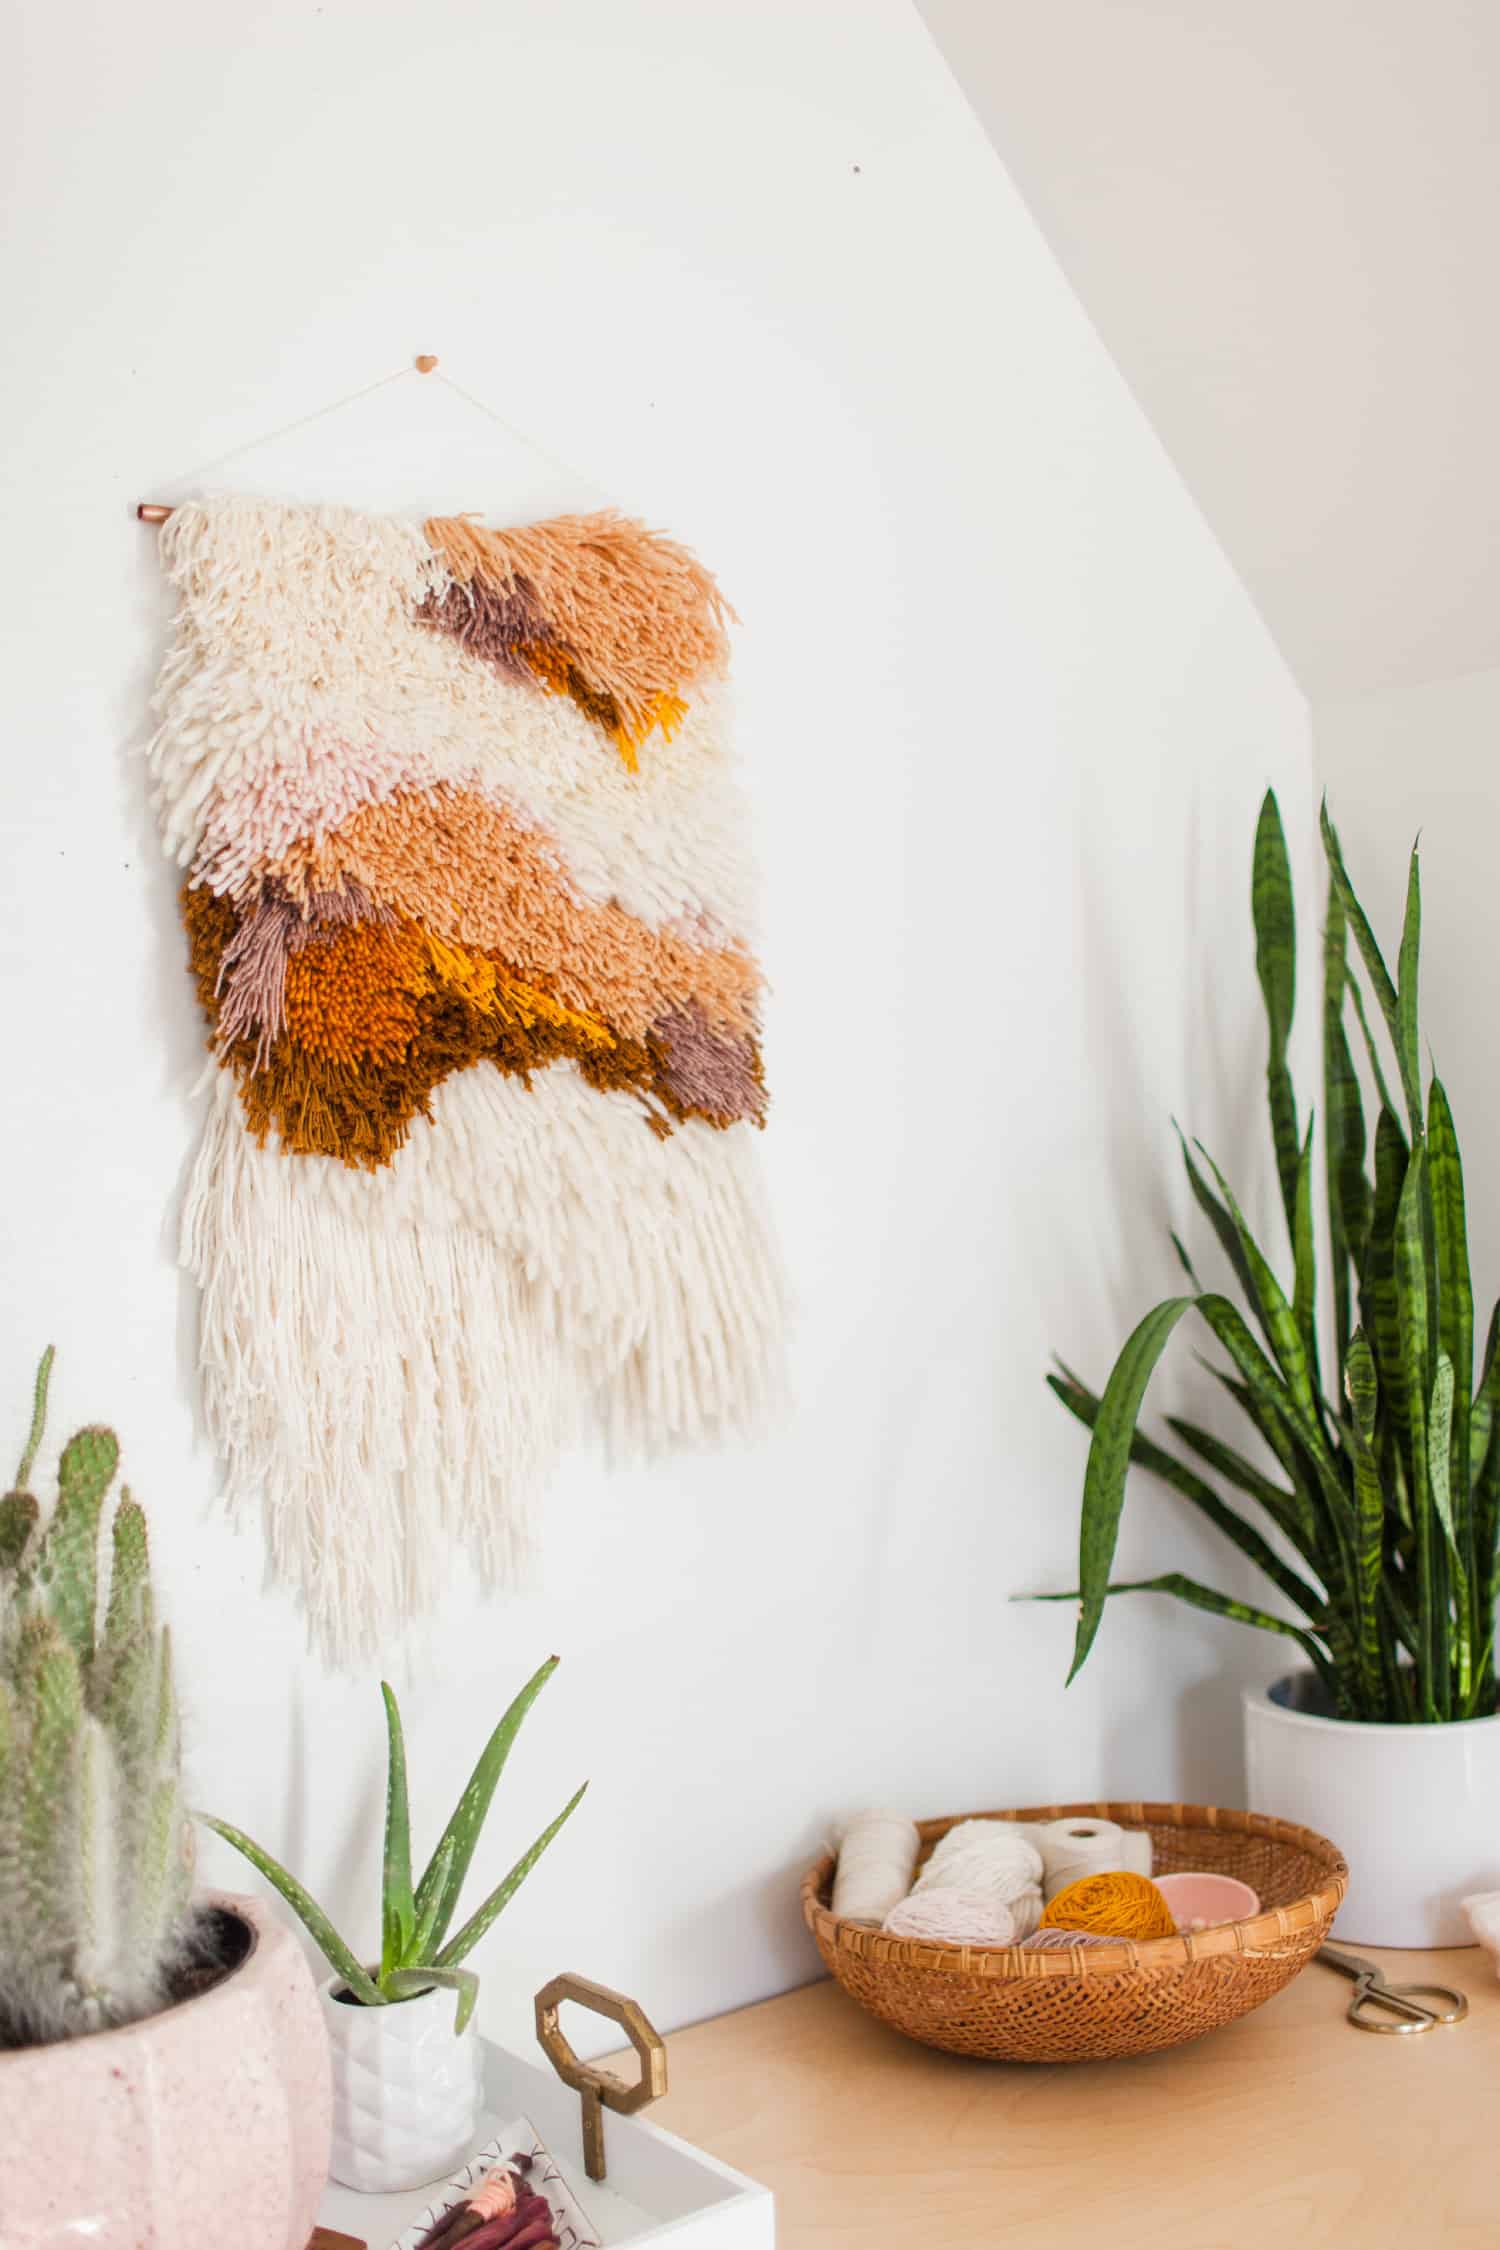 Latch hook wall hanging from A Beautiful Mess